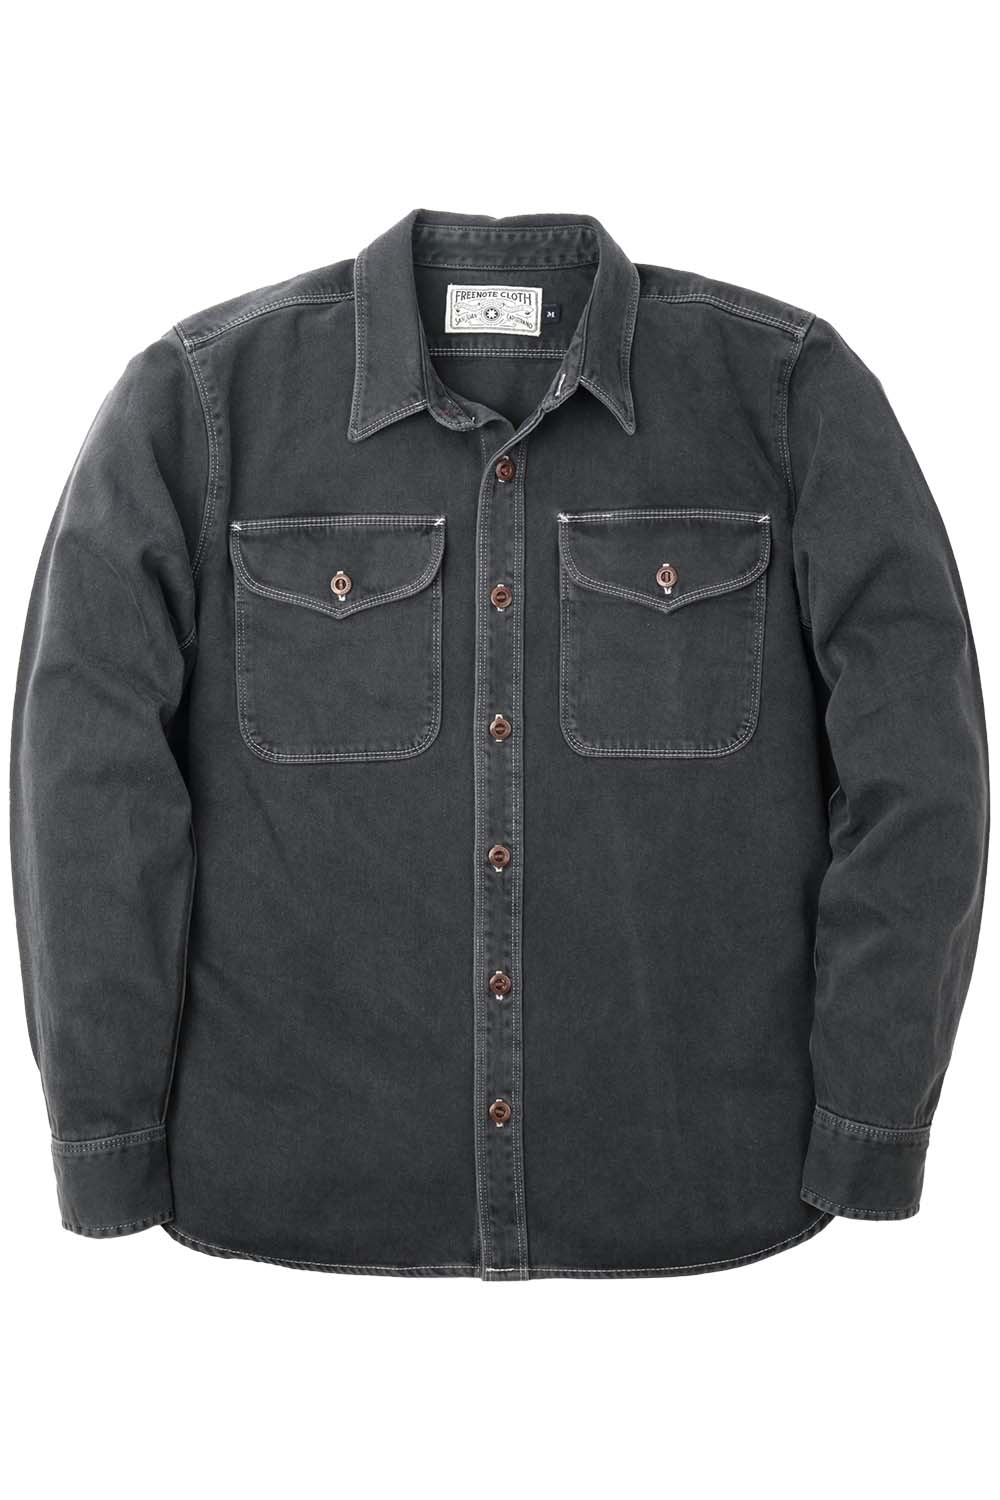 Freenote Cloth - Utility Shirt - Charcoal - Front